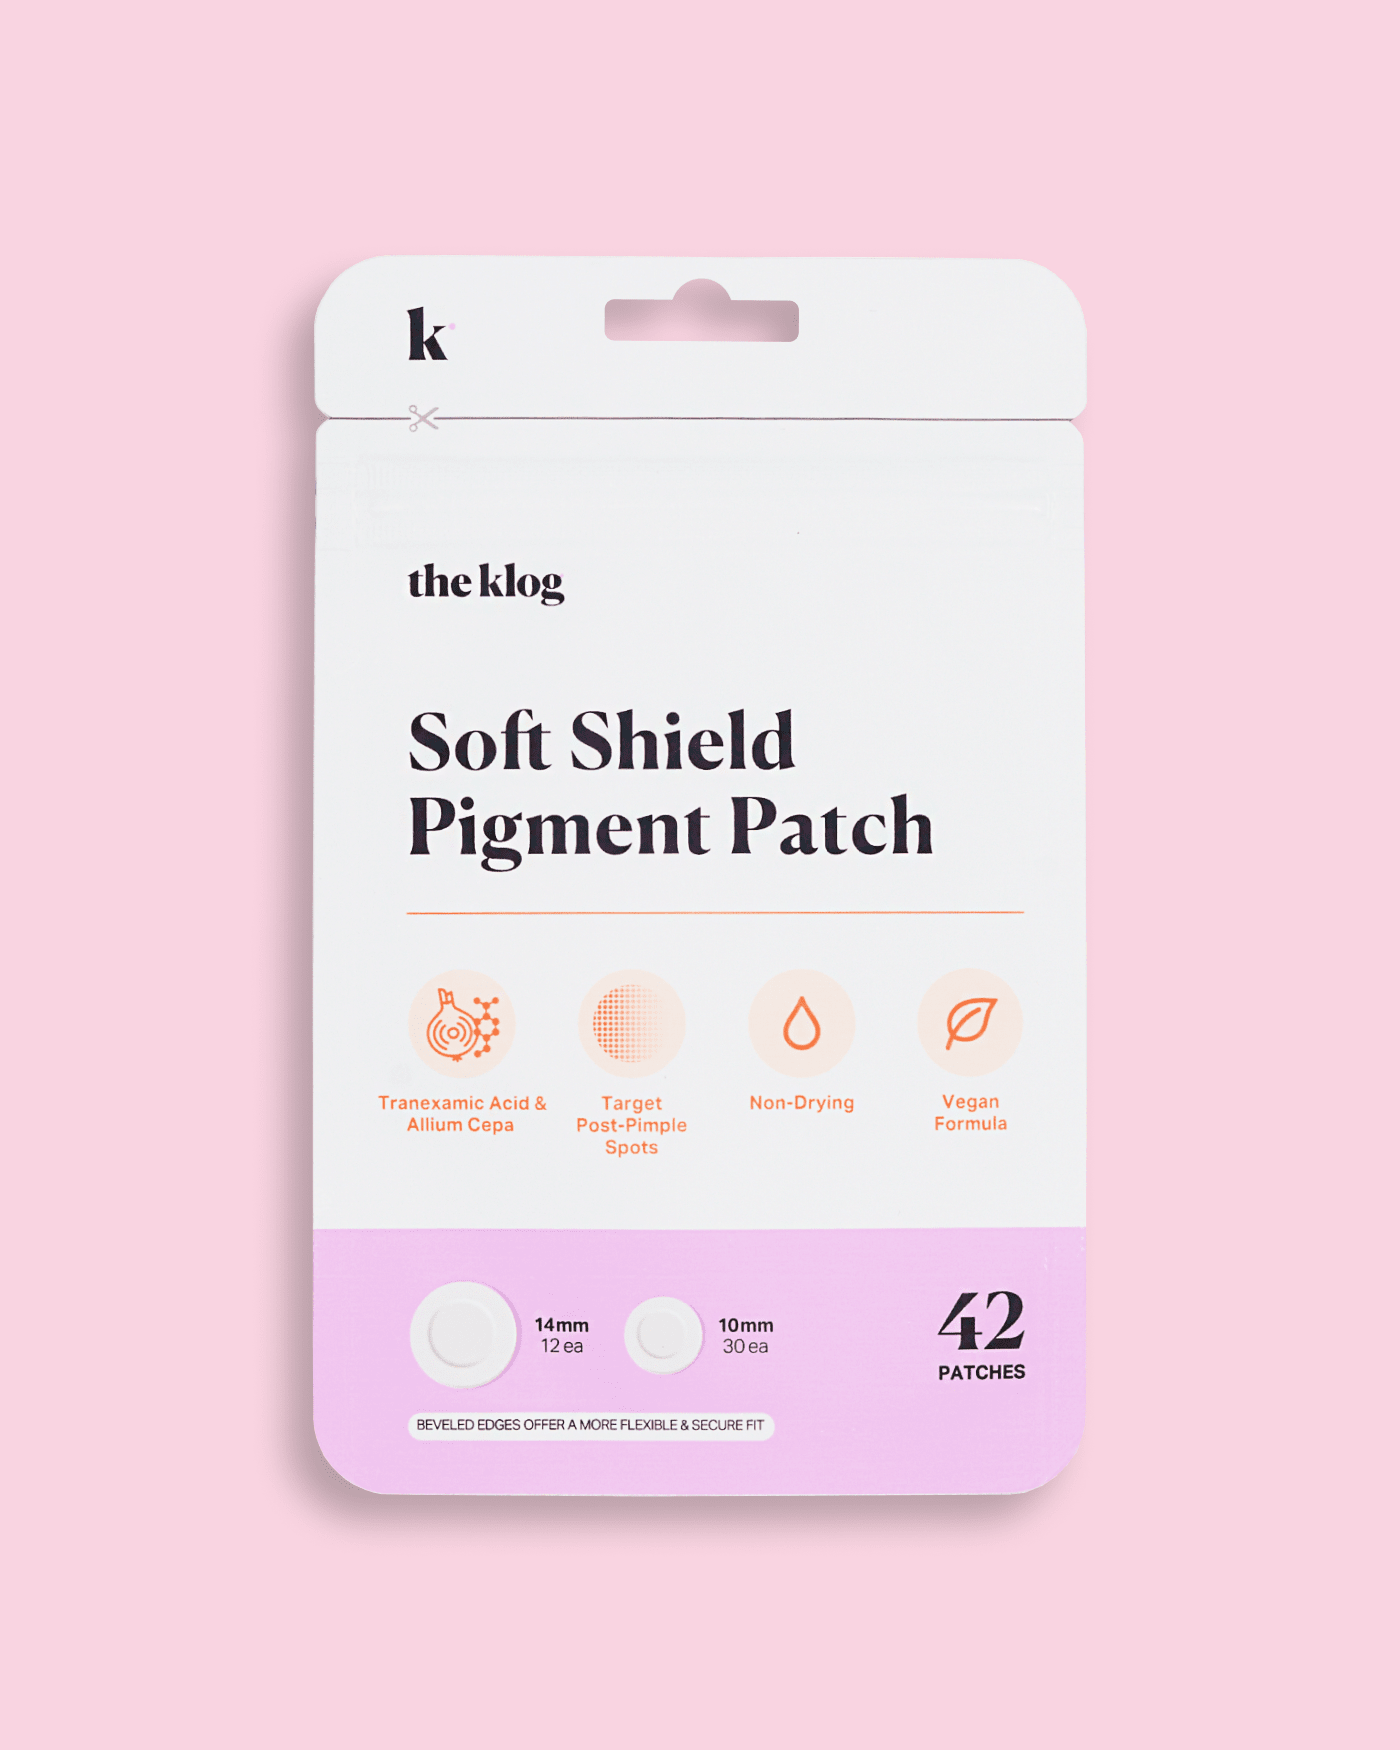 Soft Shield Pigment Patch the klog 